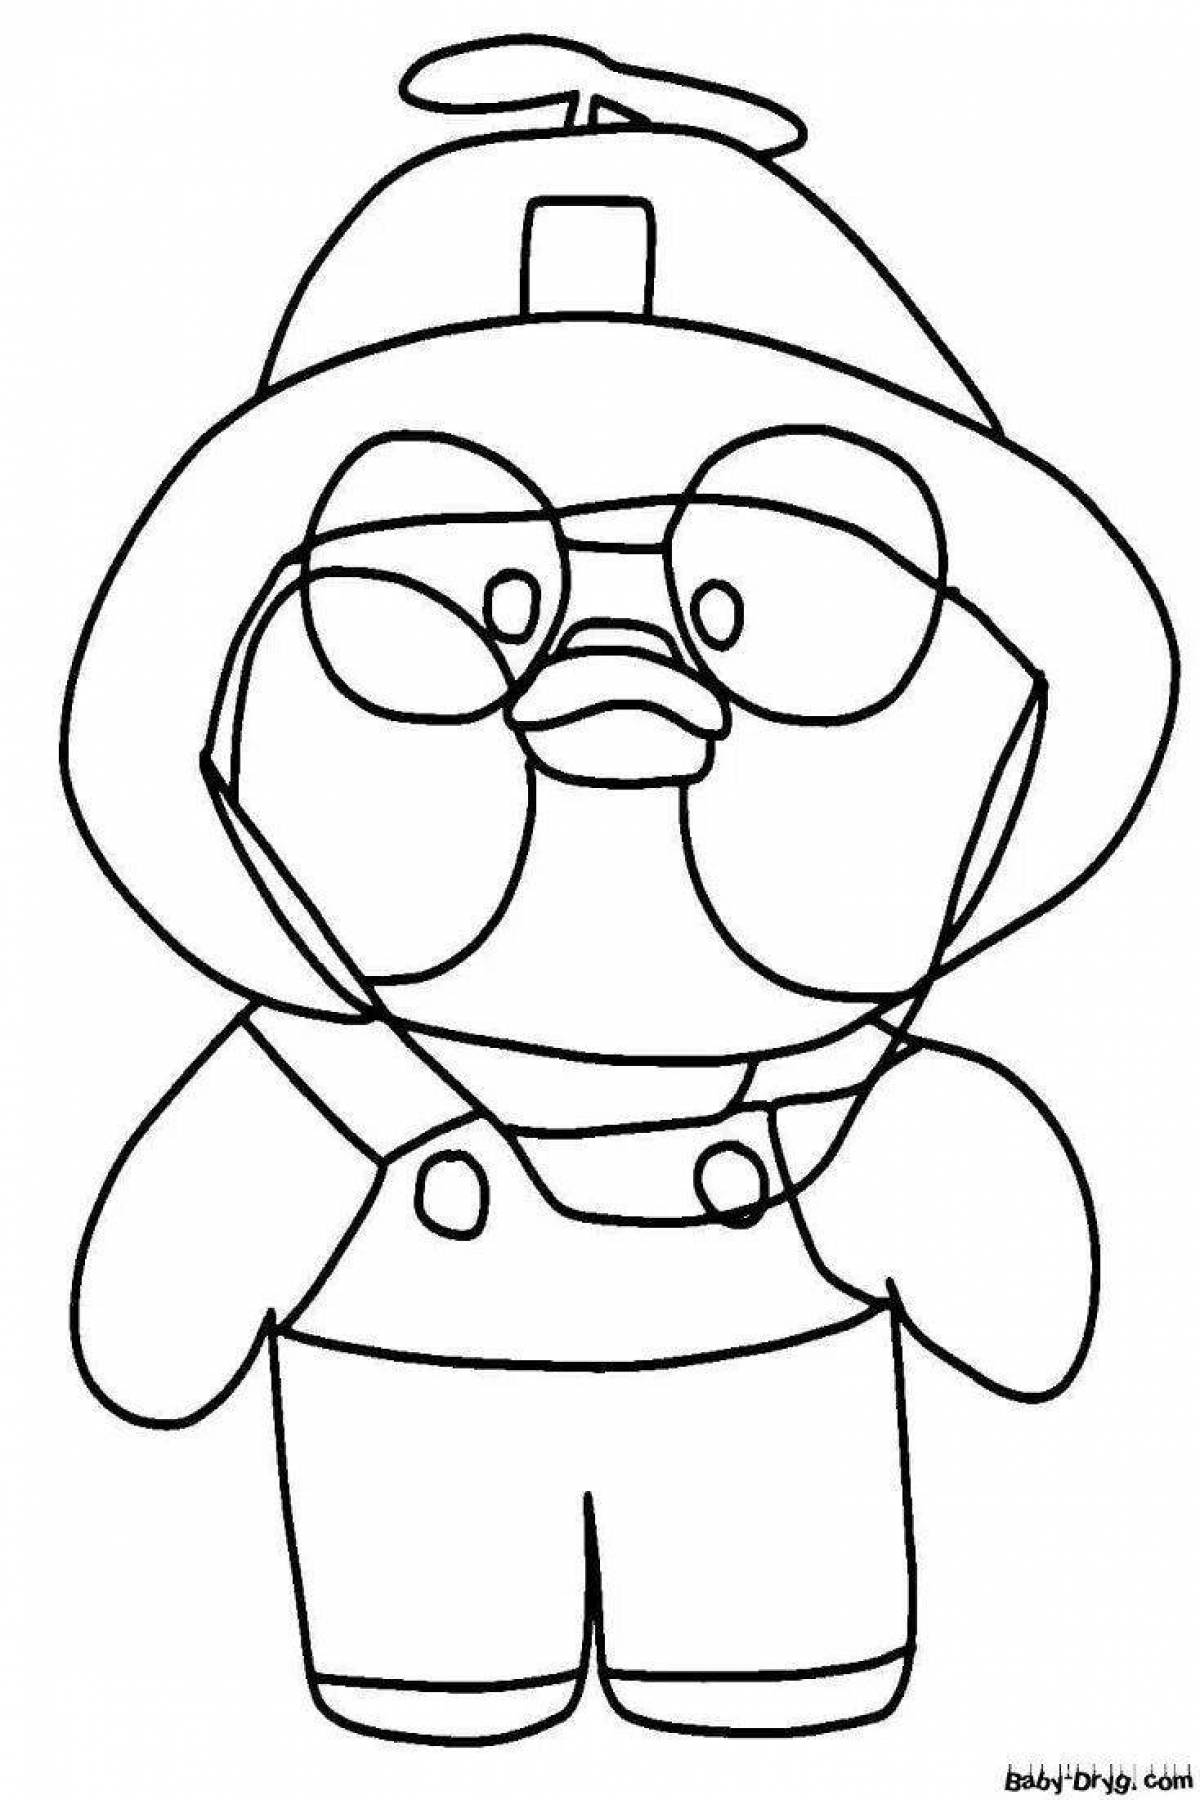 Lalanfant duck coloring page filled with color